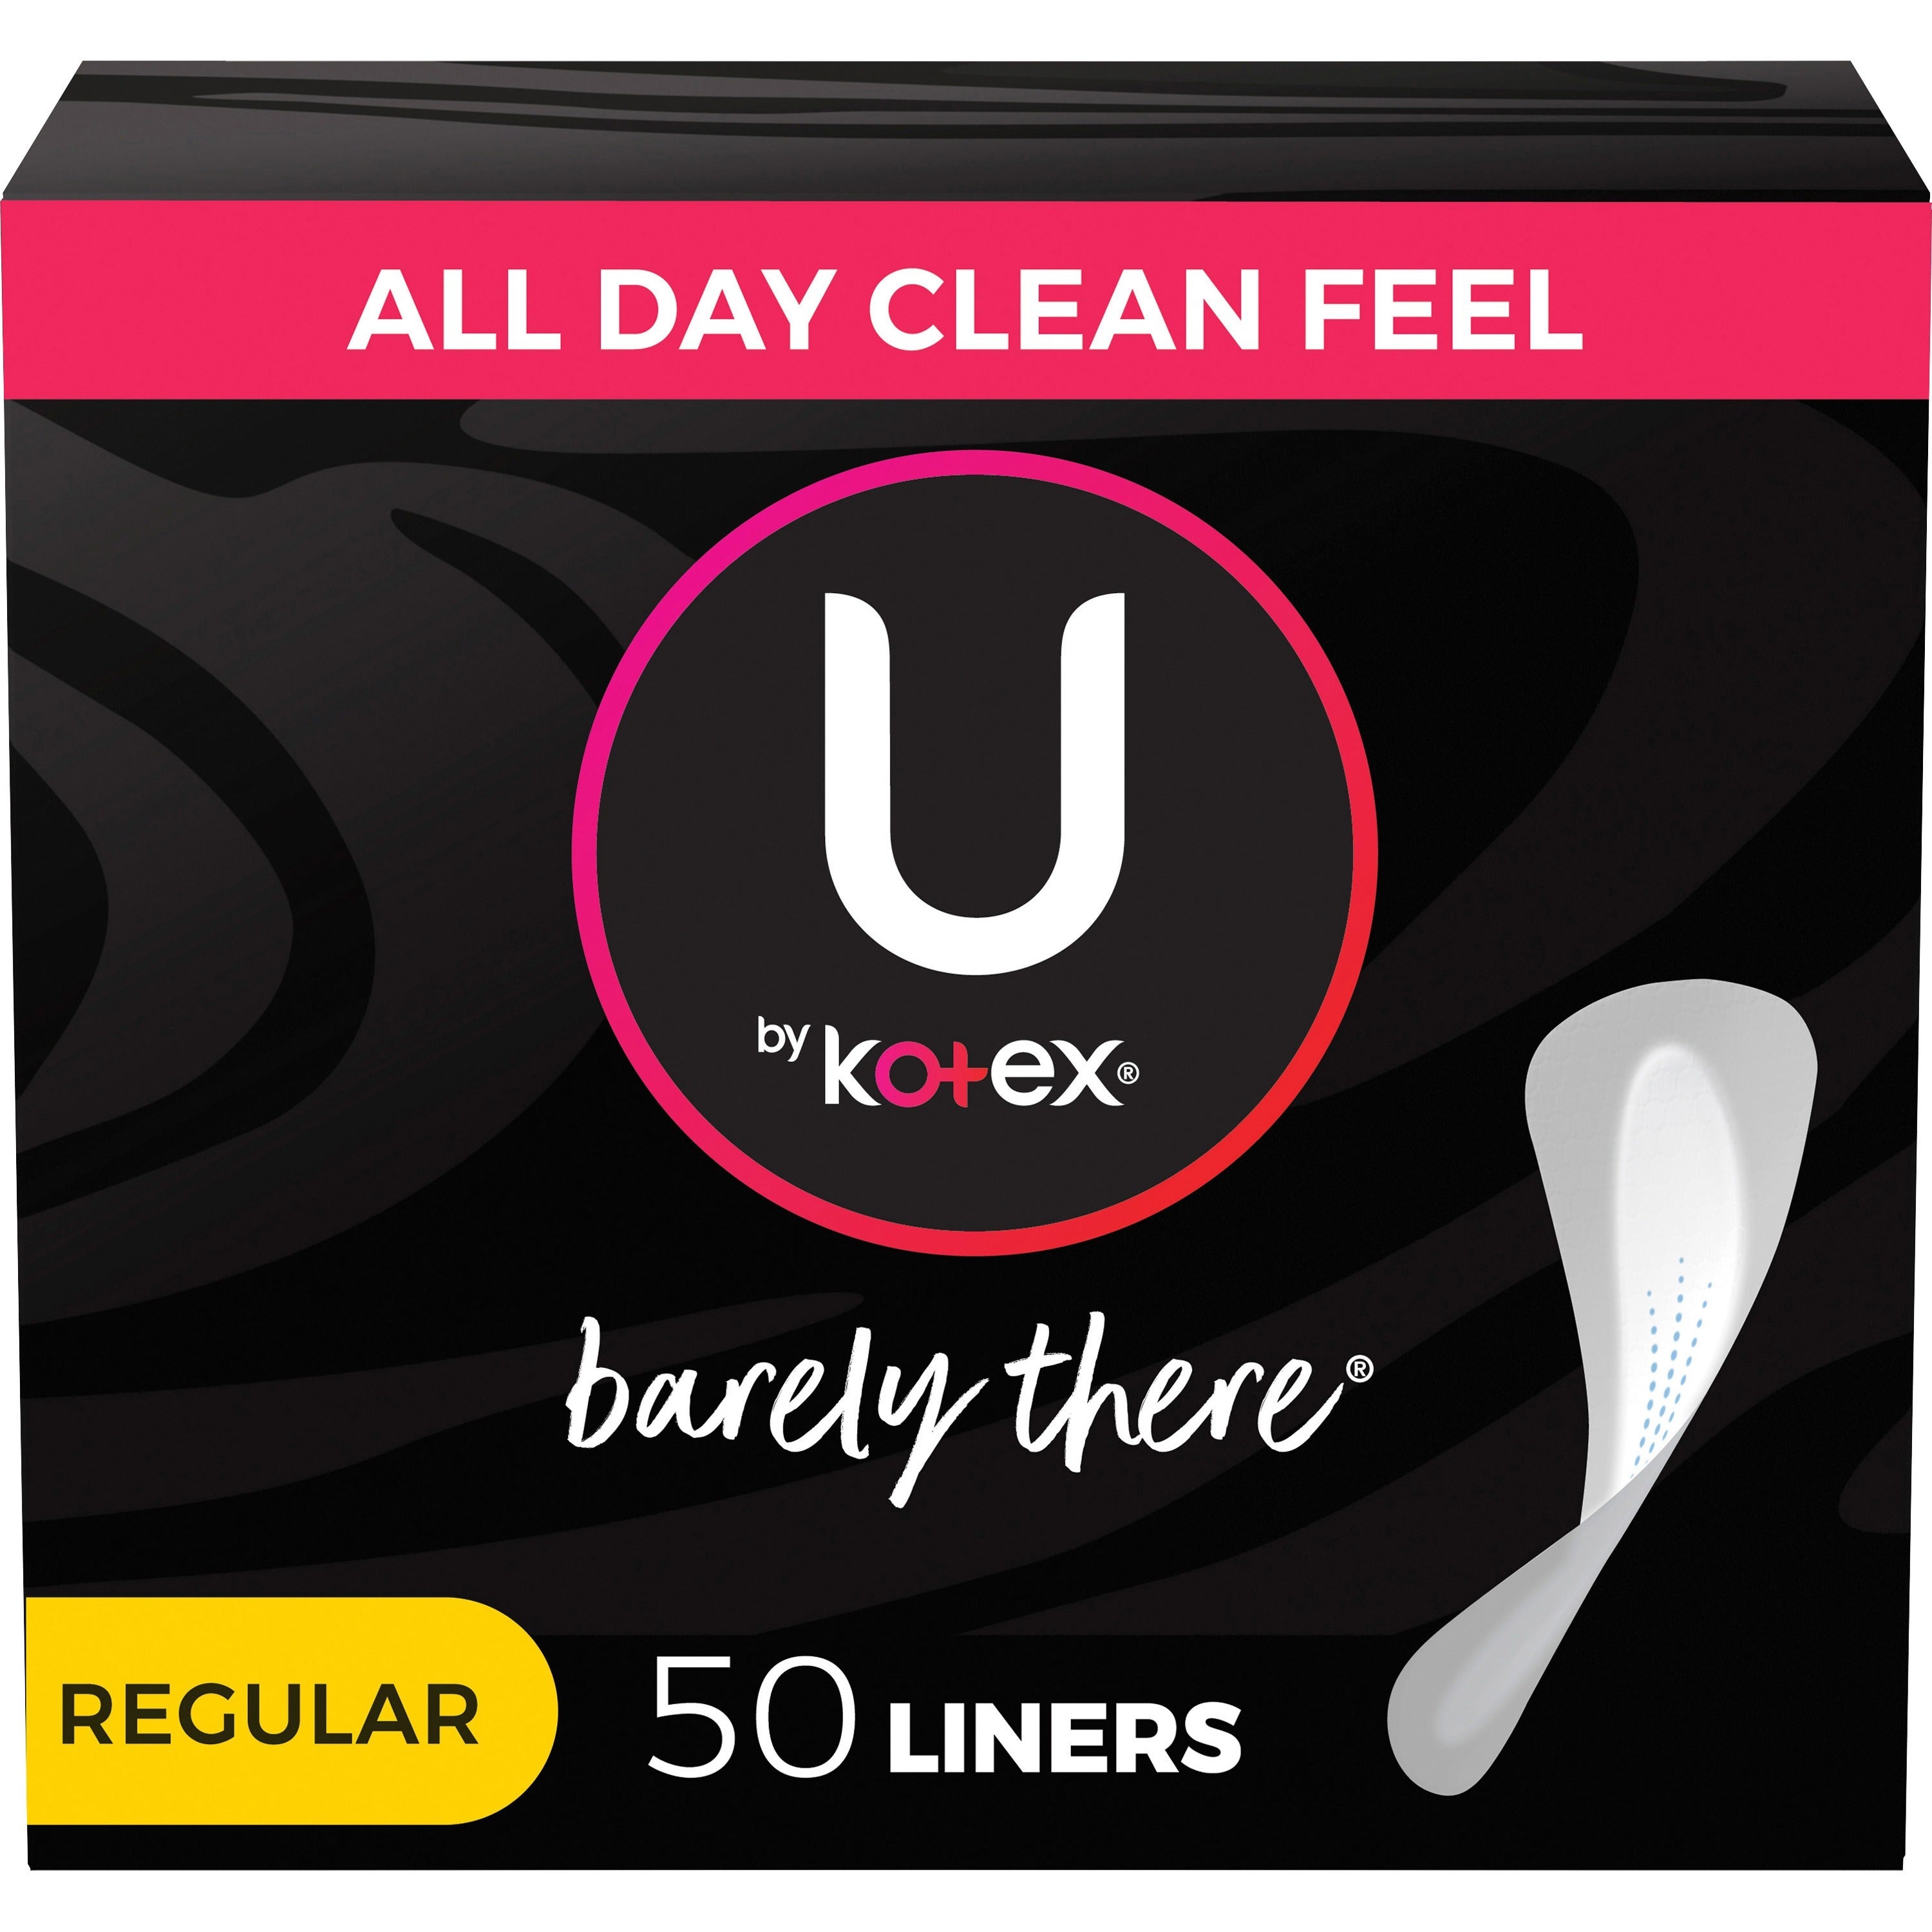 u-by-kotex-barely-there-panty-liner-1-each-individually-wrapped_kcc42489 - 1